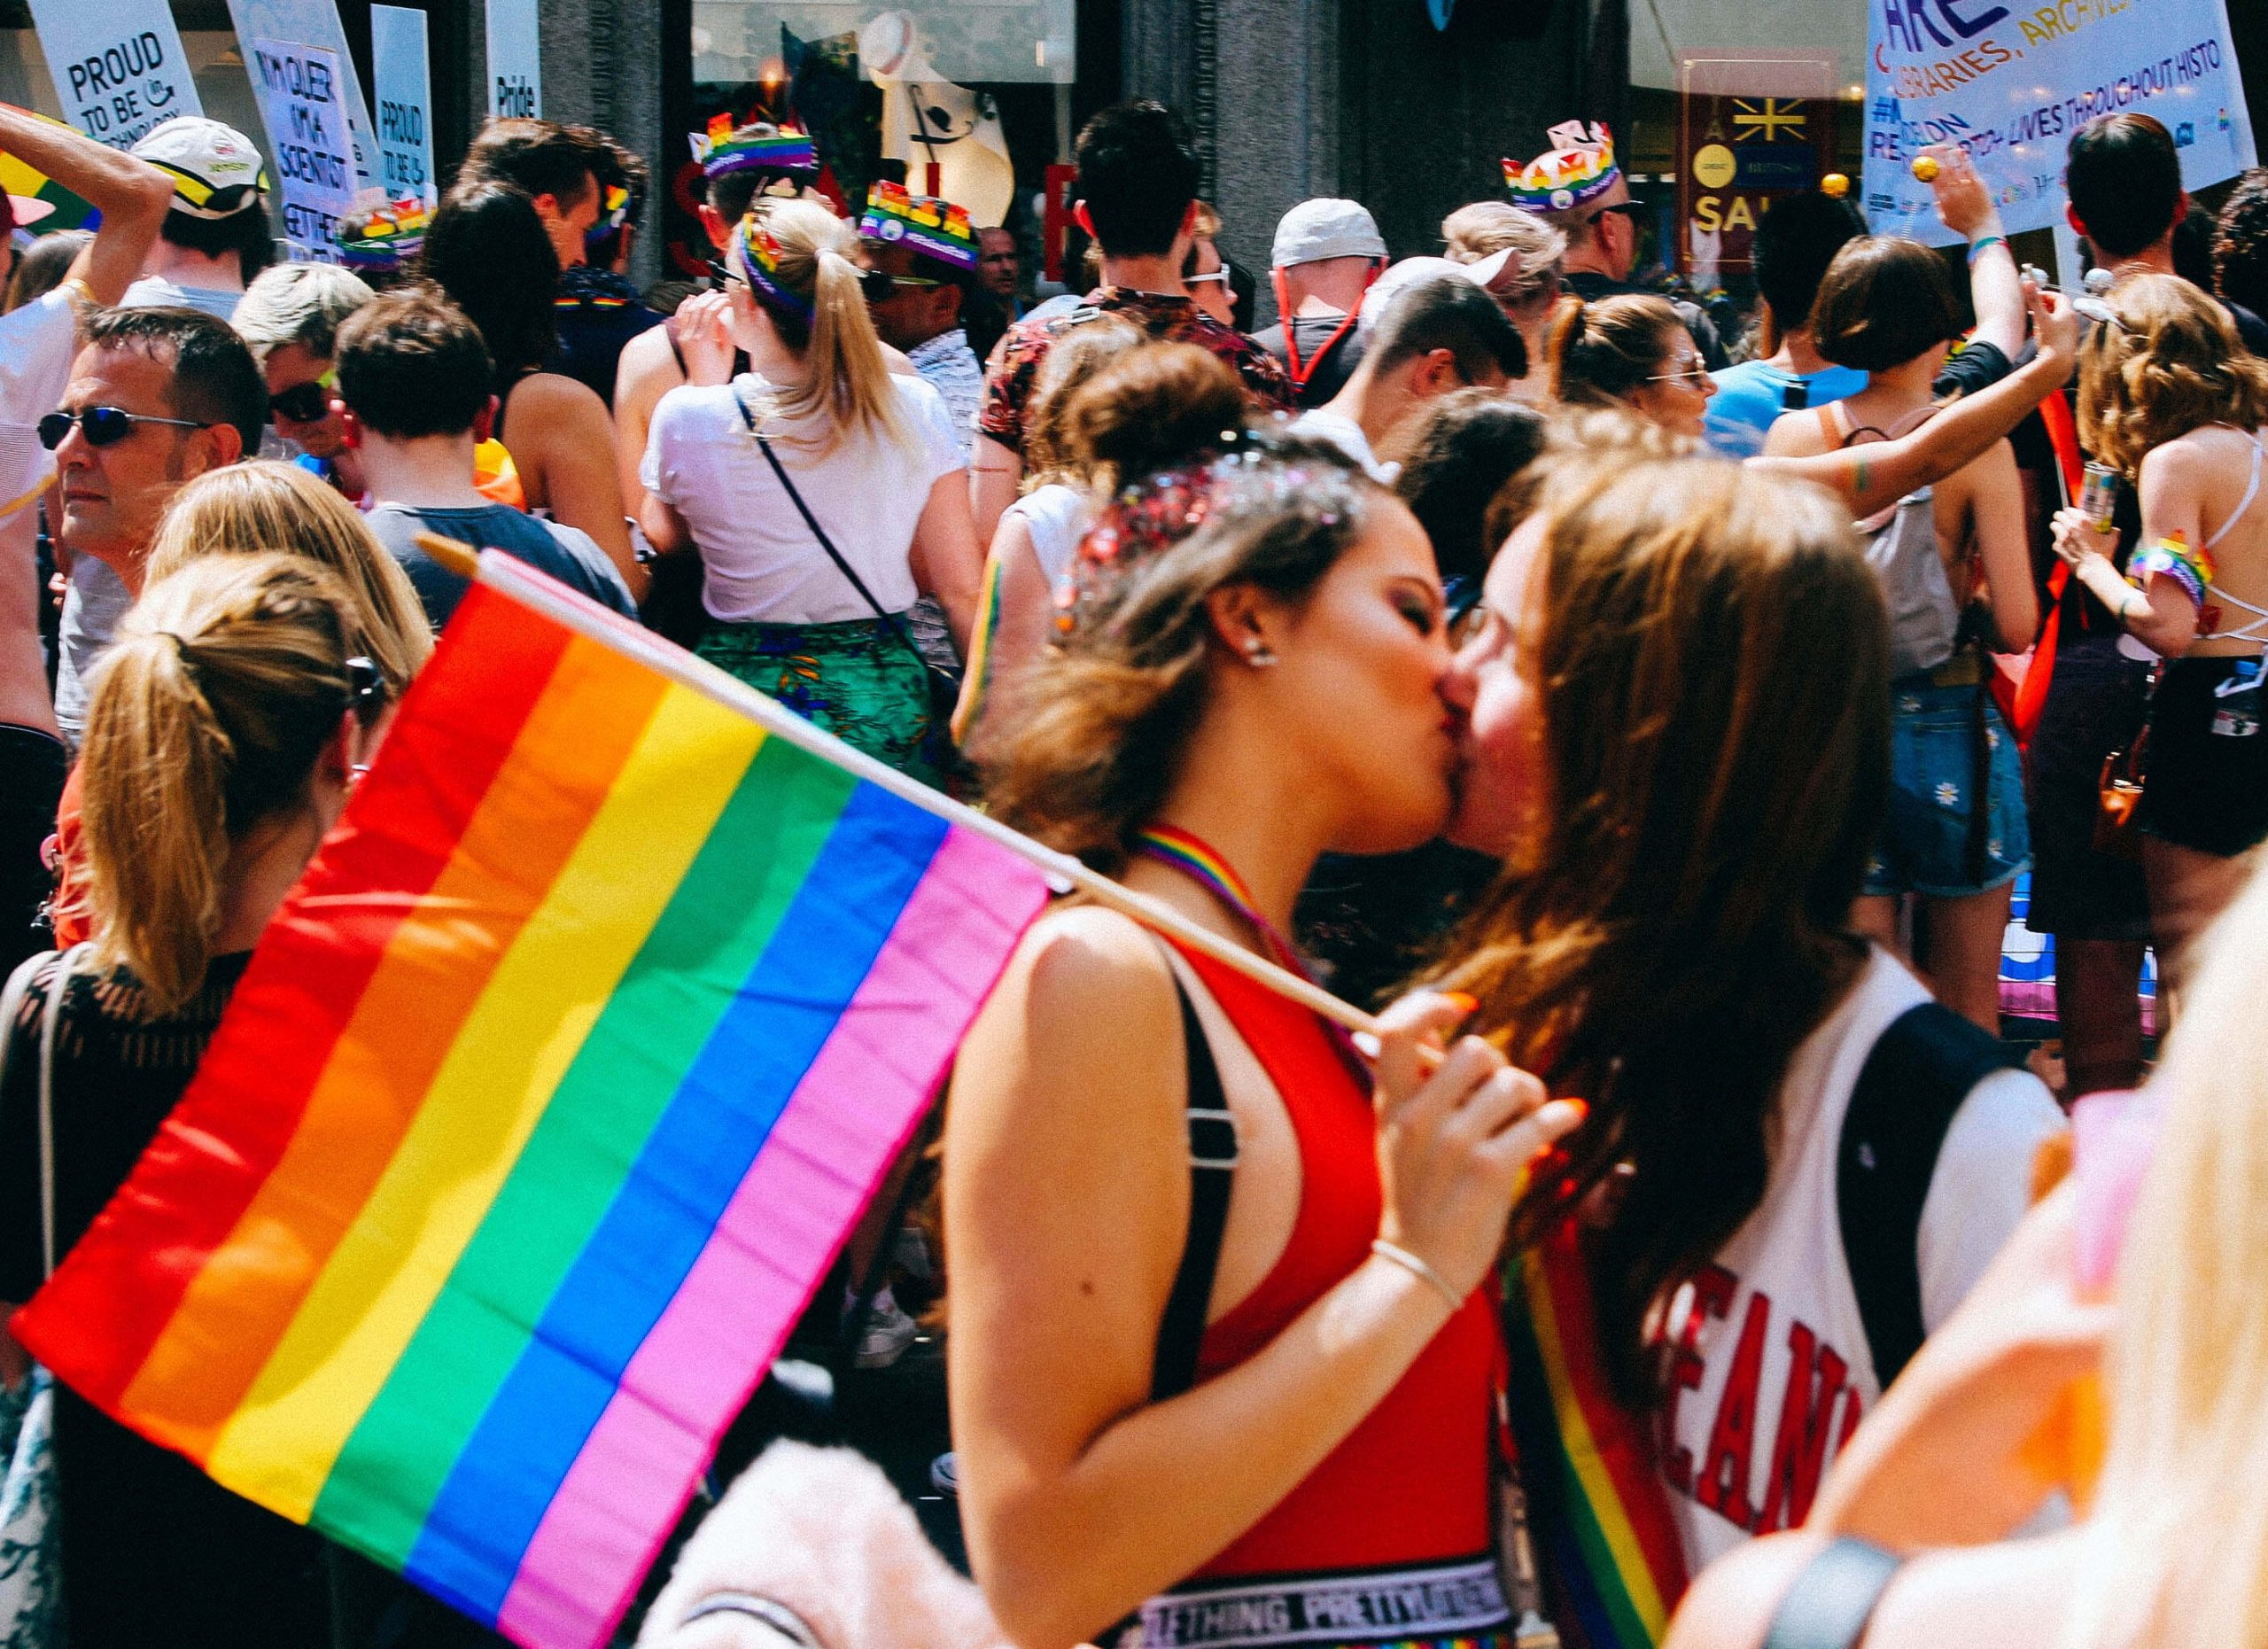 Two female-presenting people kiss in a busy crowd at a pride festival pride, while holding a rainbow pride flag.